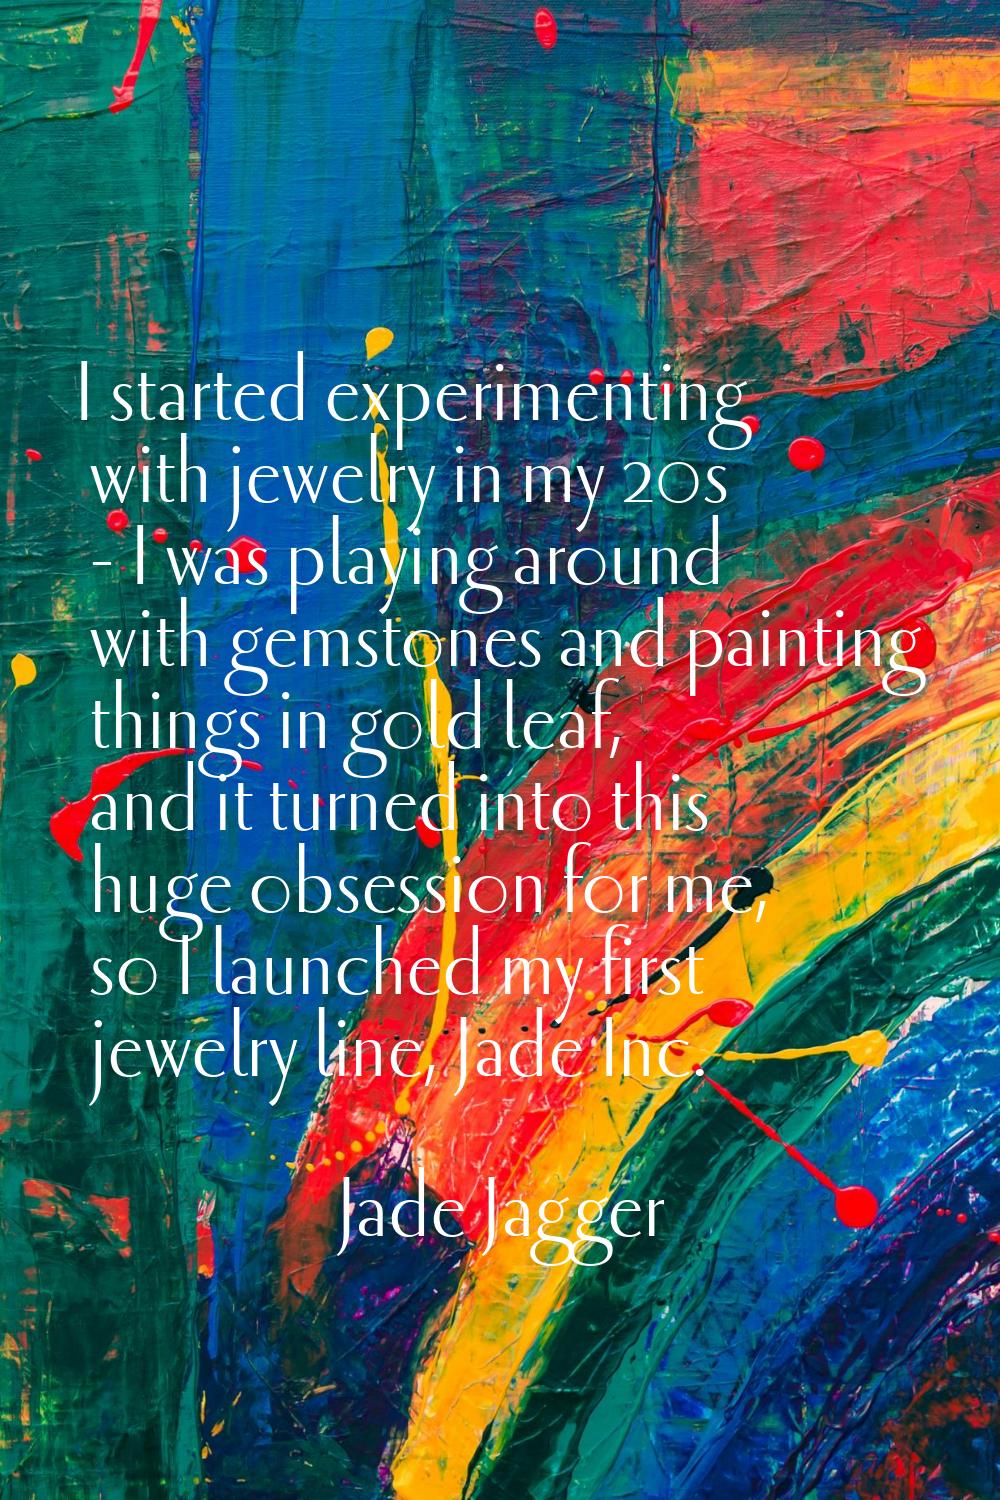 I started experimenting with jewelry in my 20s - I was playing around with gemstones and painting t